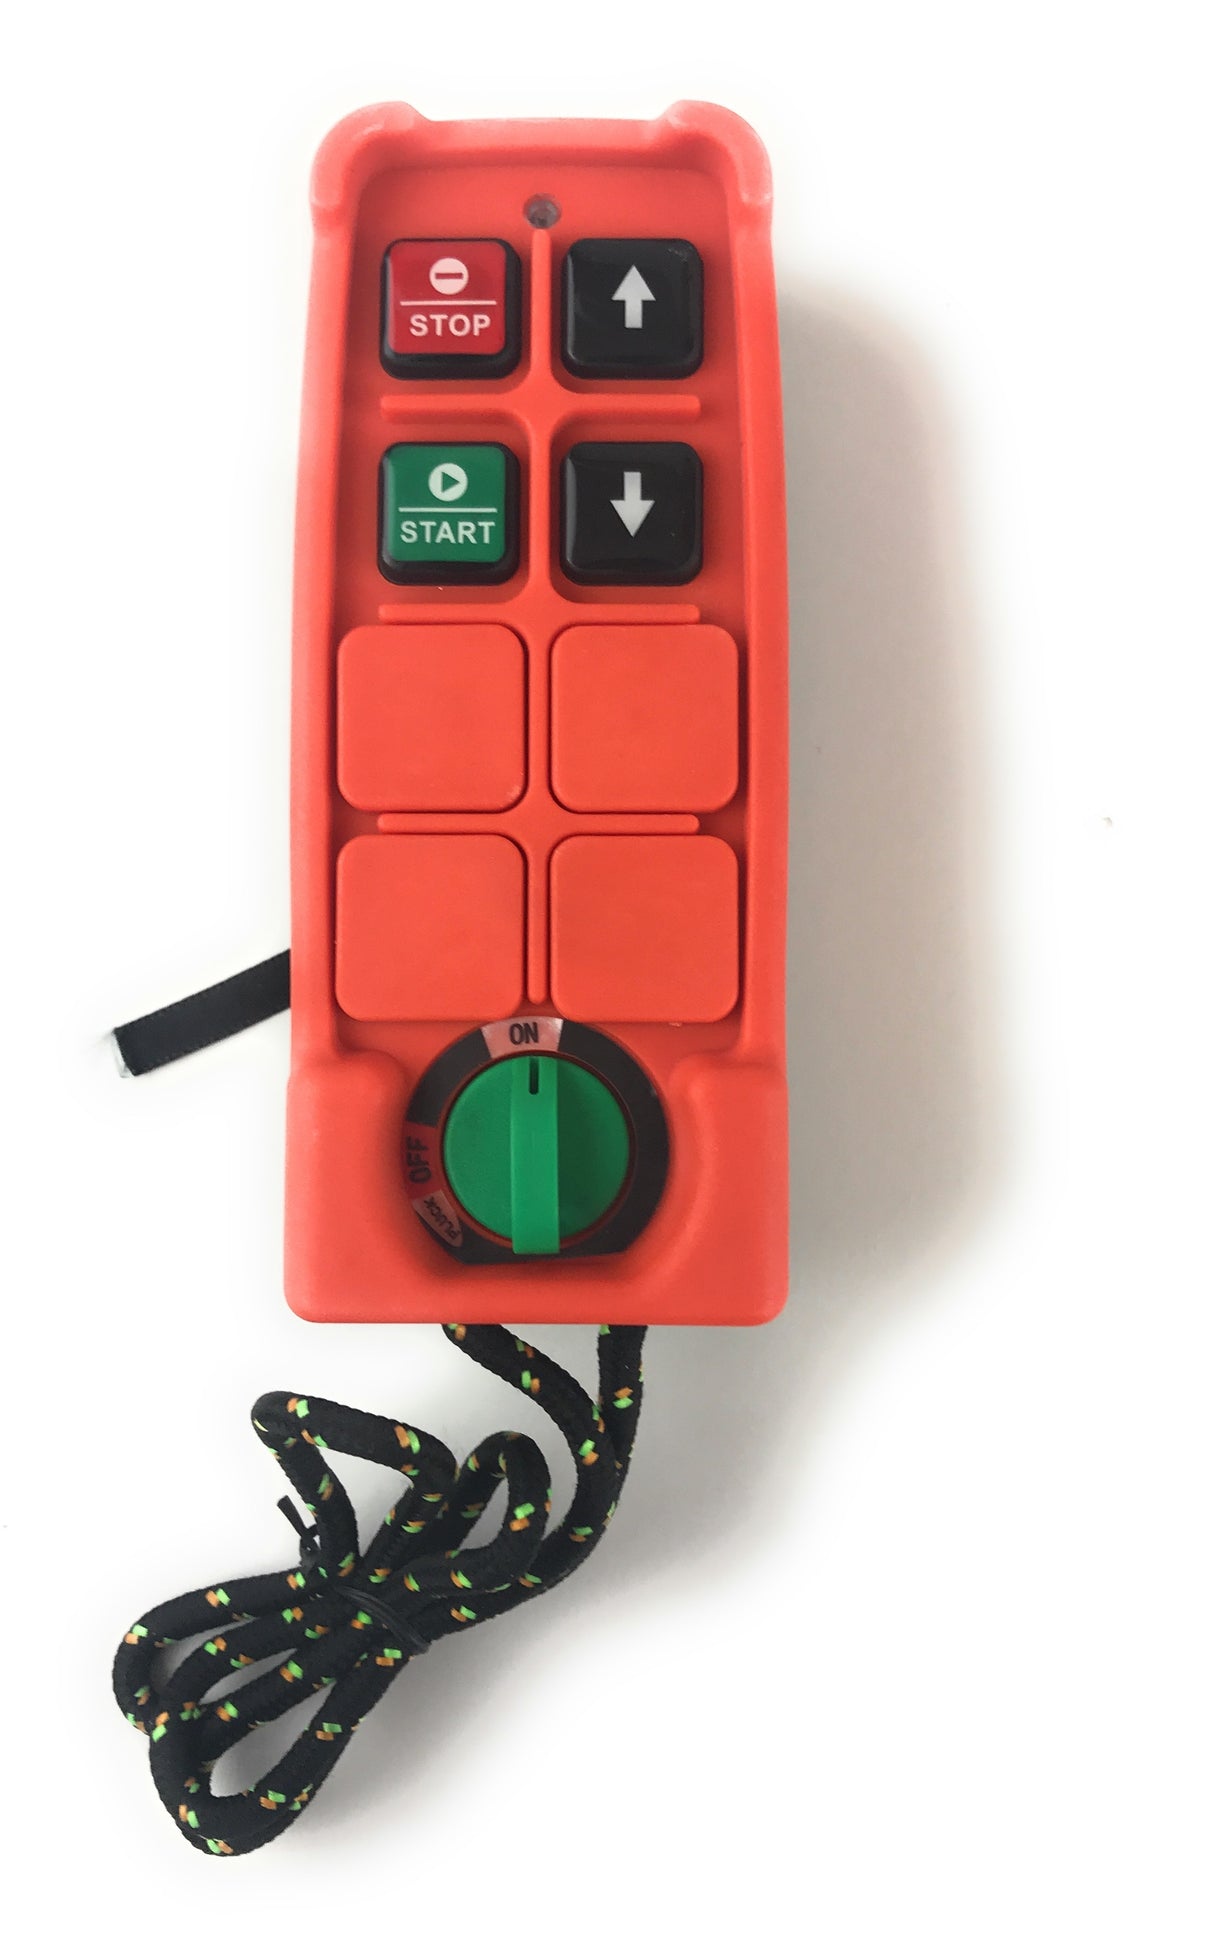 Five Oceans Remote Control and Receiver Card (RX-TX) for Wireless Hoist